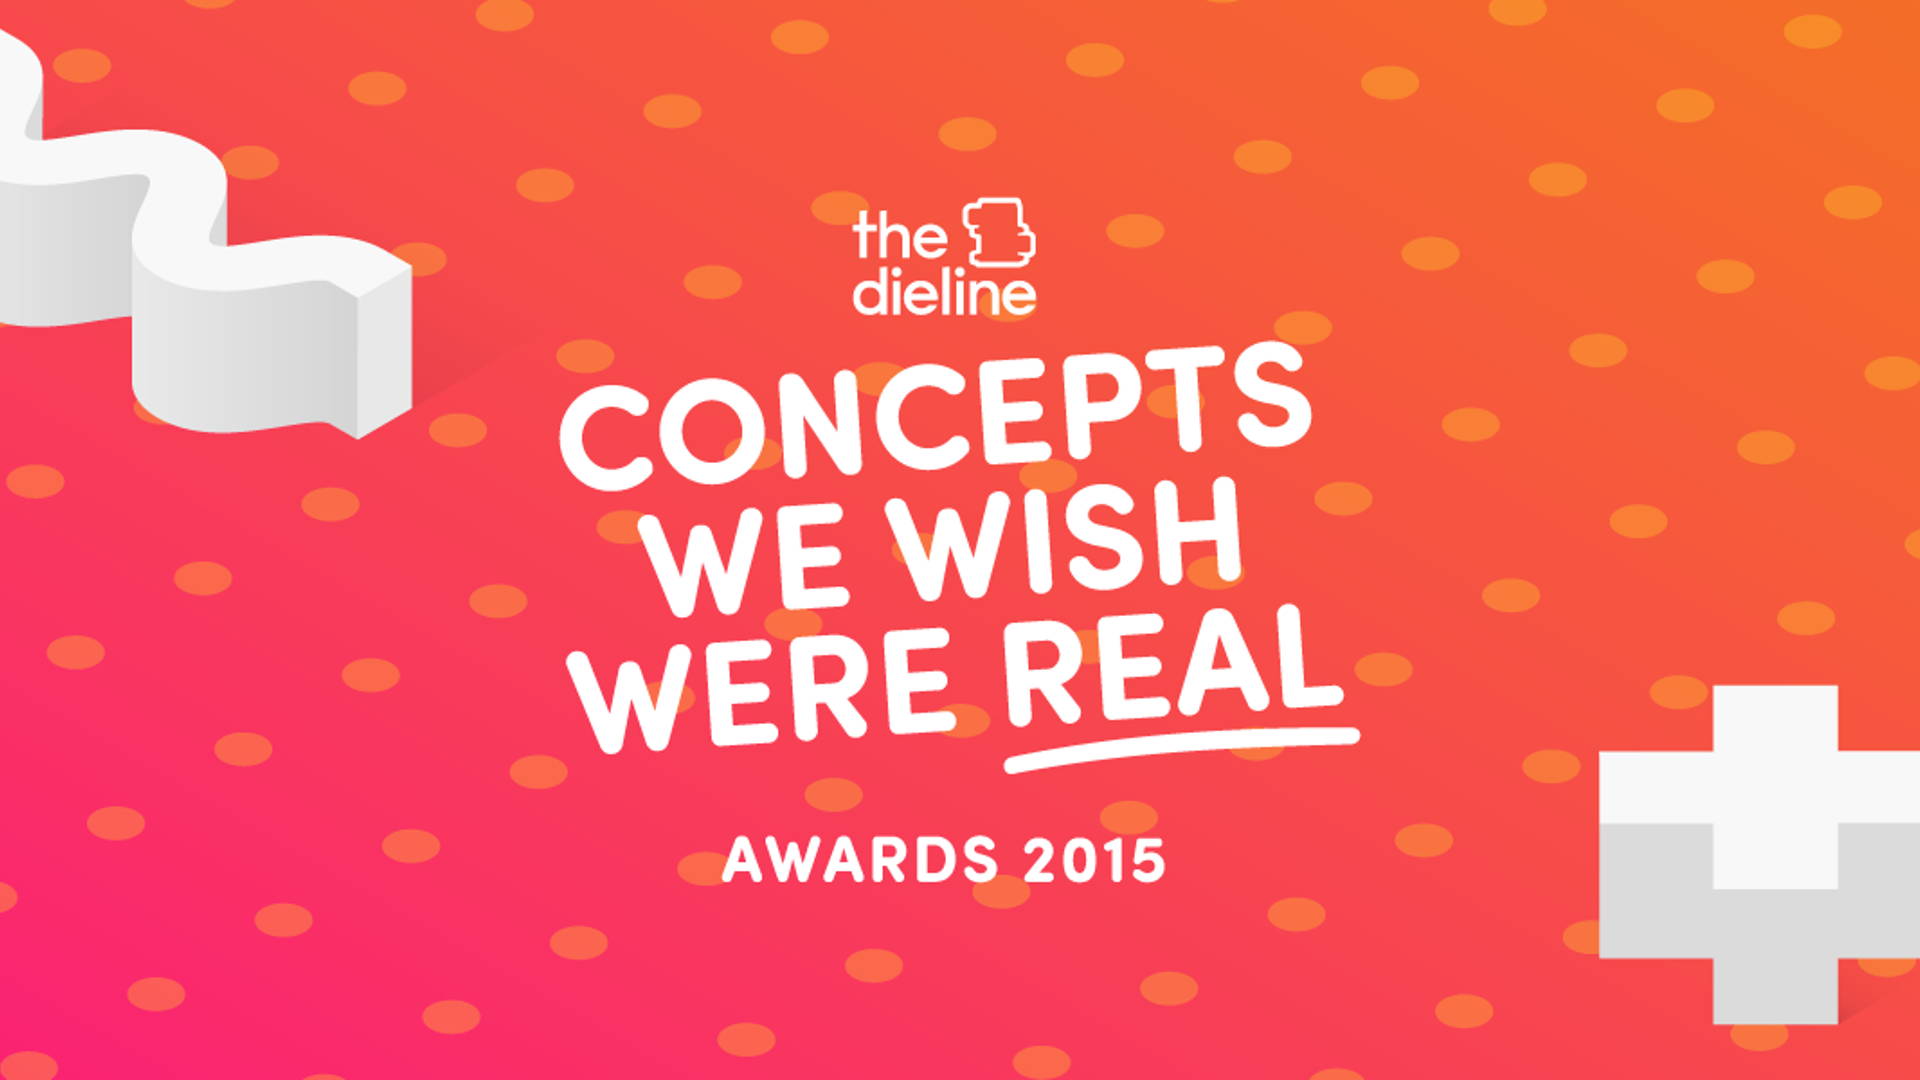 Featured image for The Concepts We Wish Were Real Awards 2015 Winners